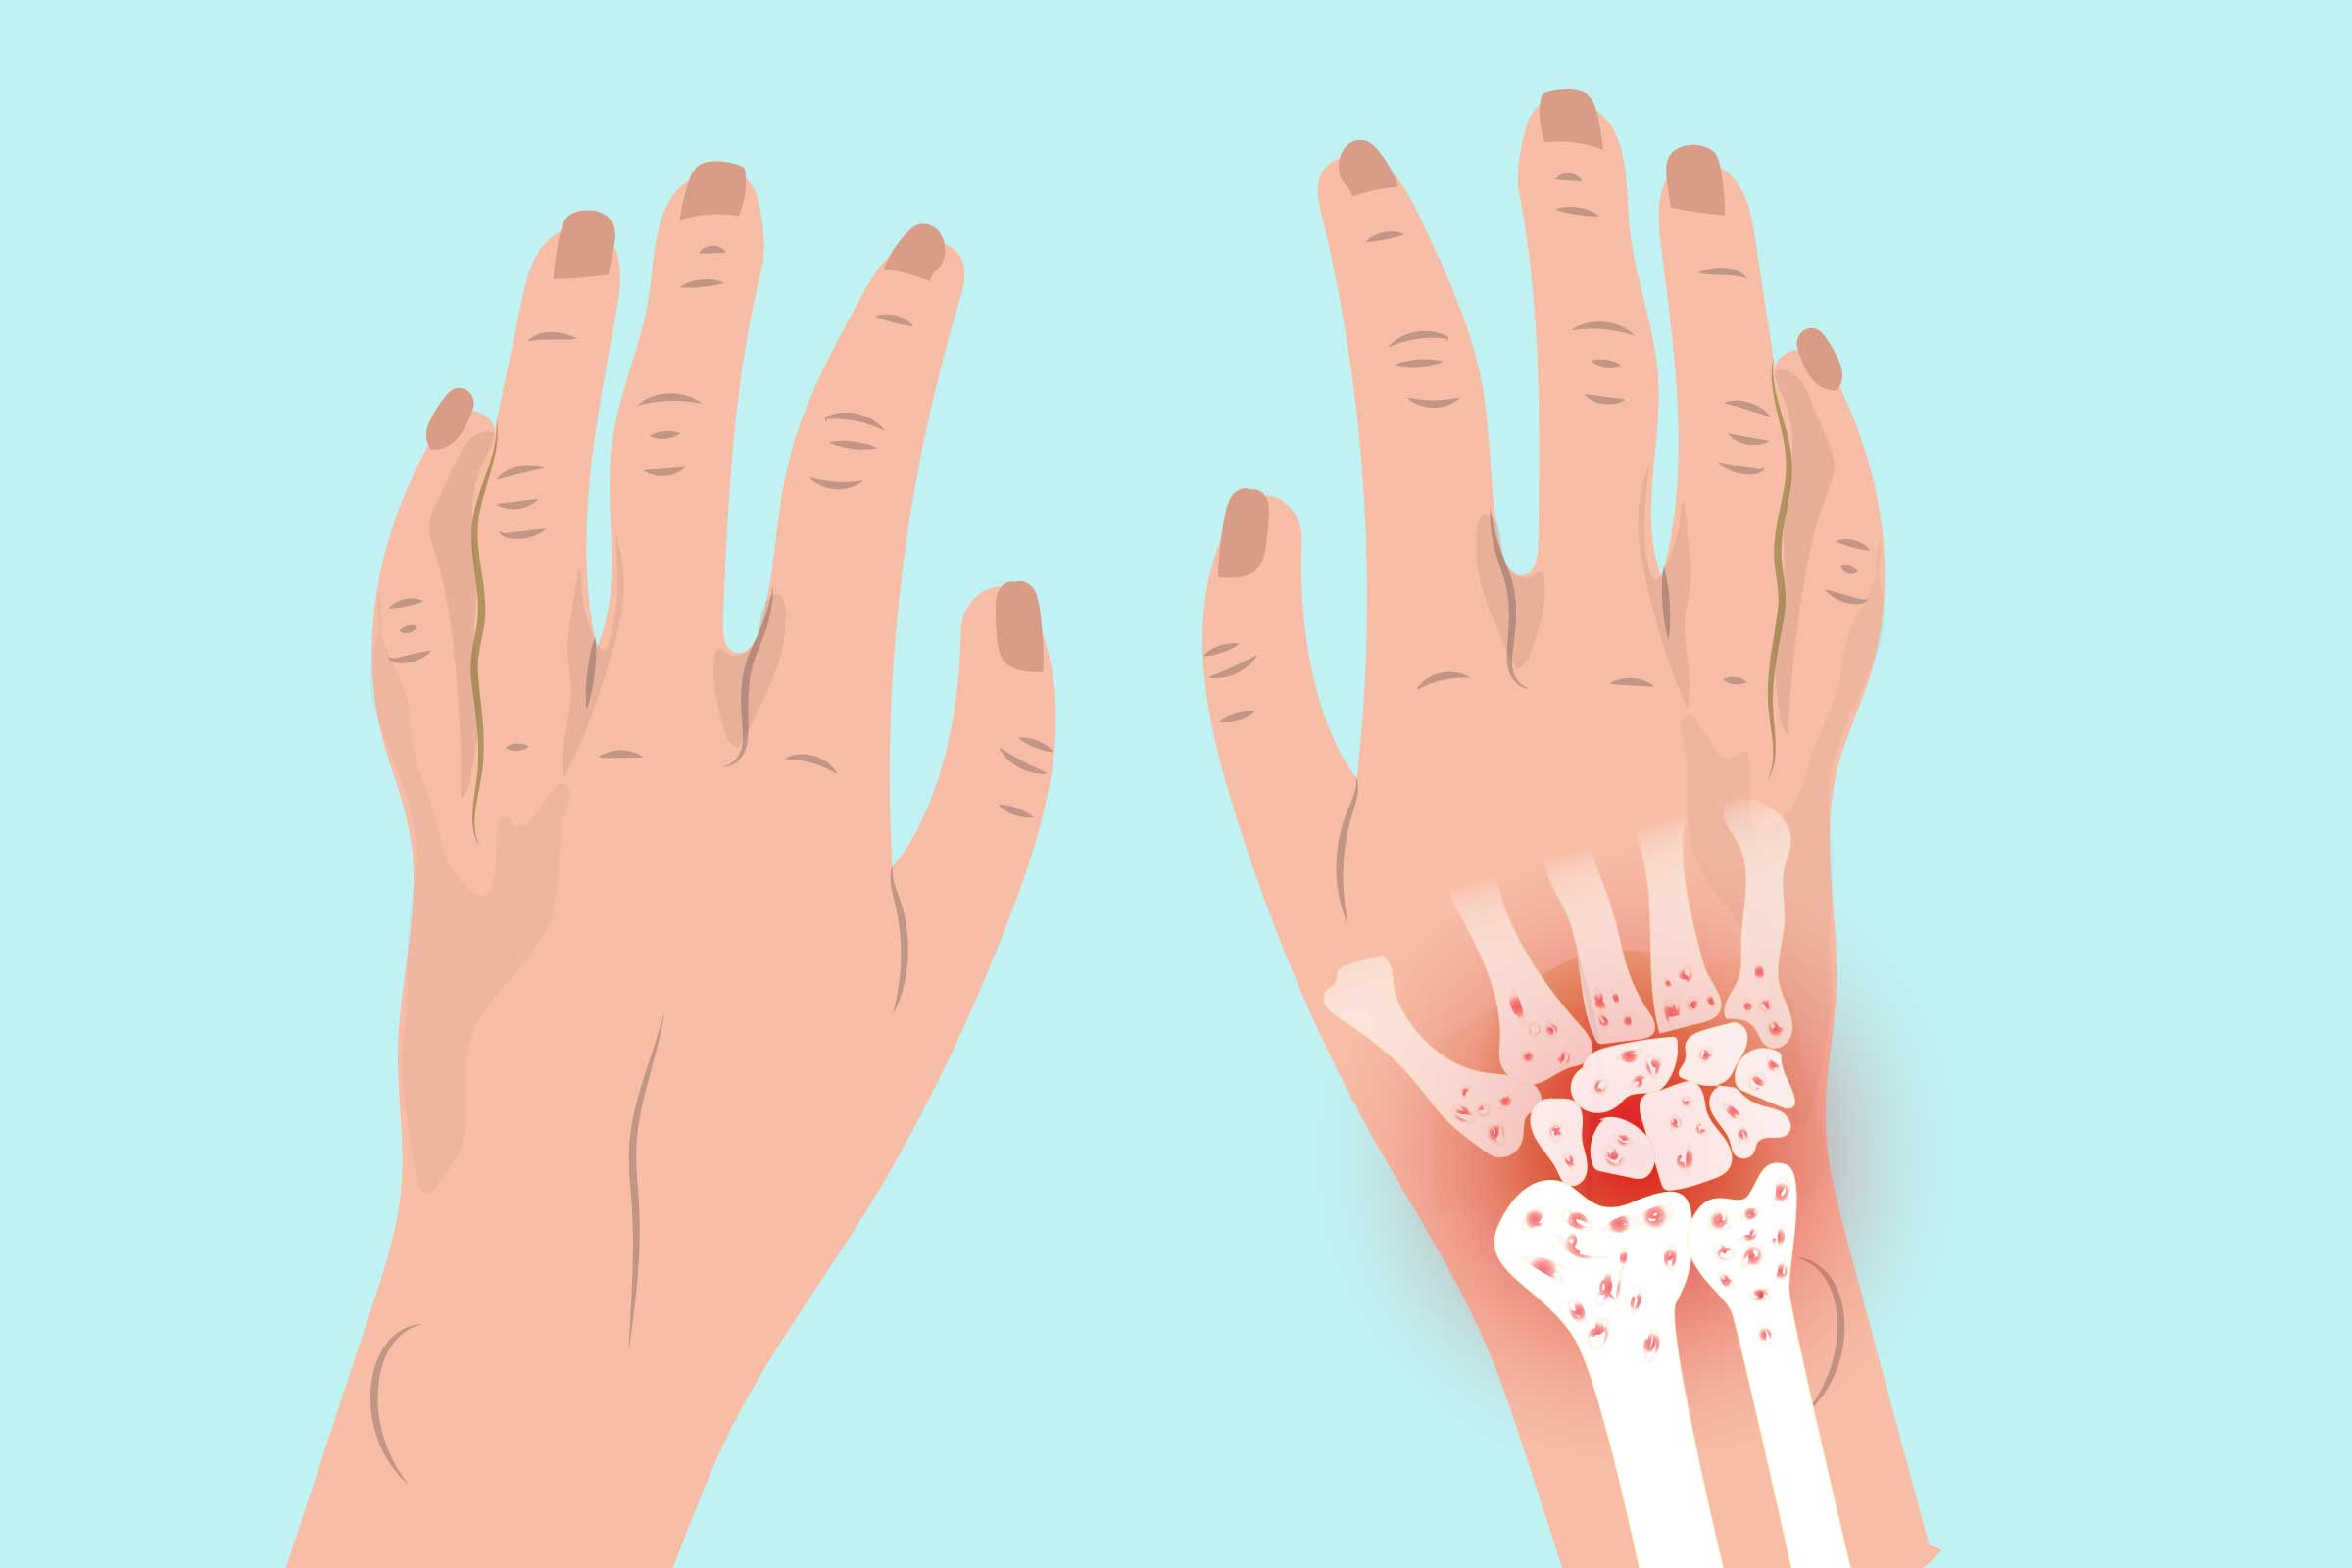 What are the main symptoms of arthritis?